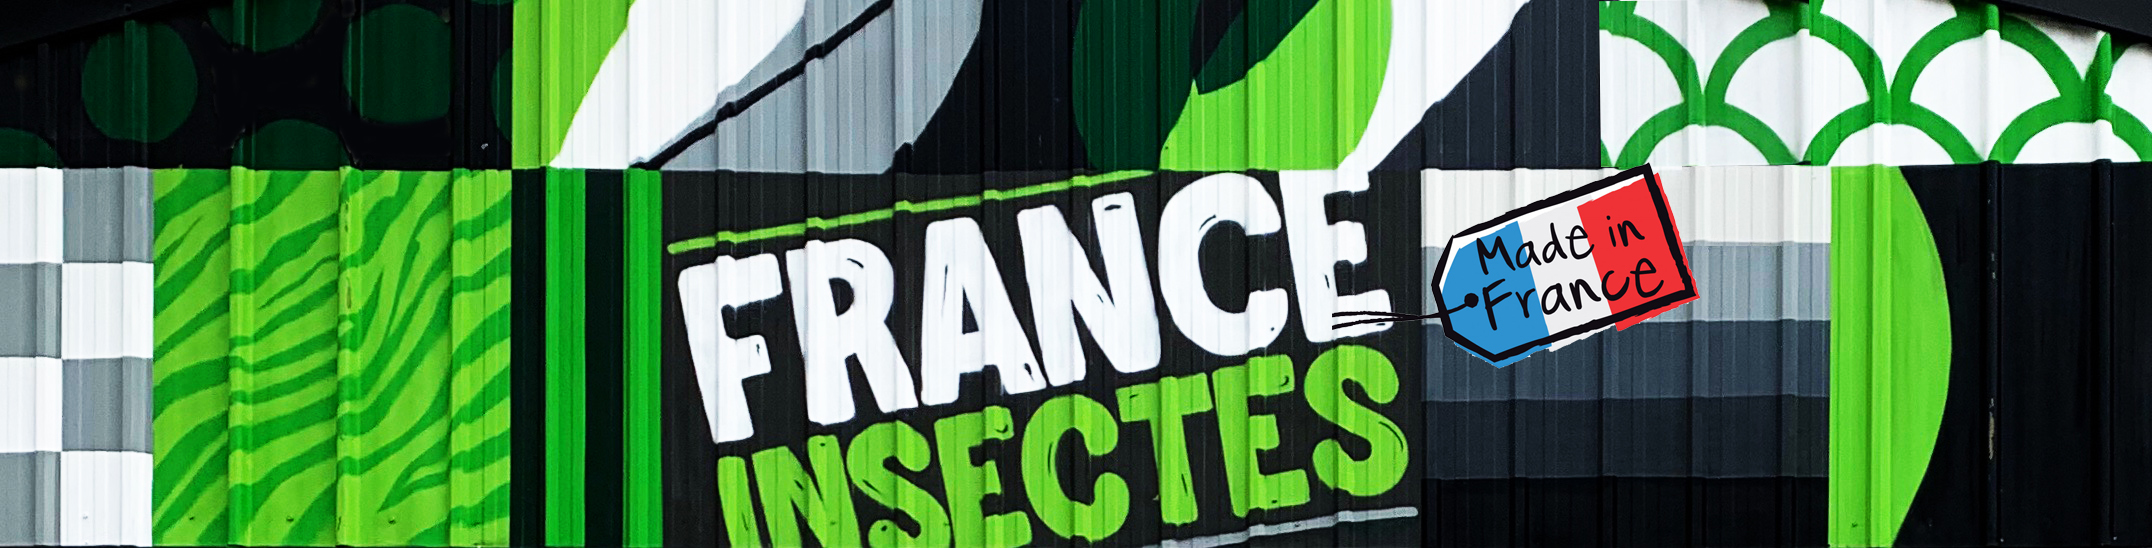 BANNIERE FRANCE INSECTES 2023 MADE IN FRANCE